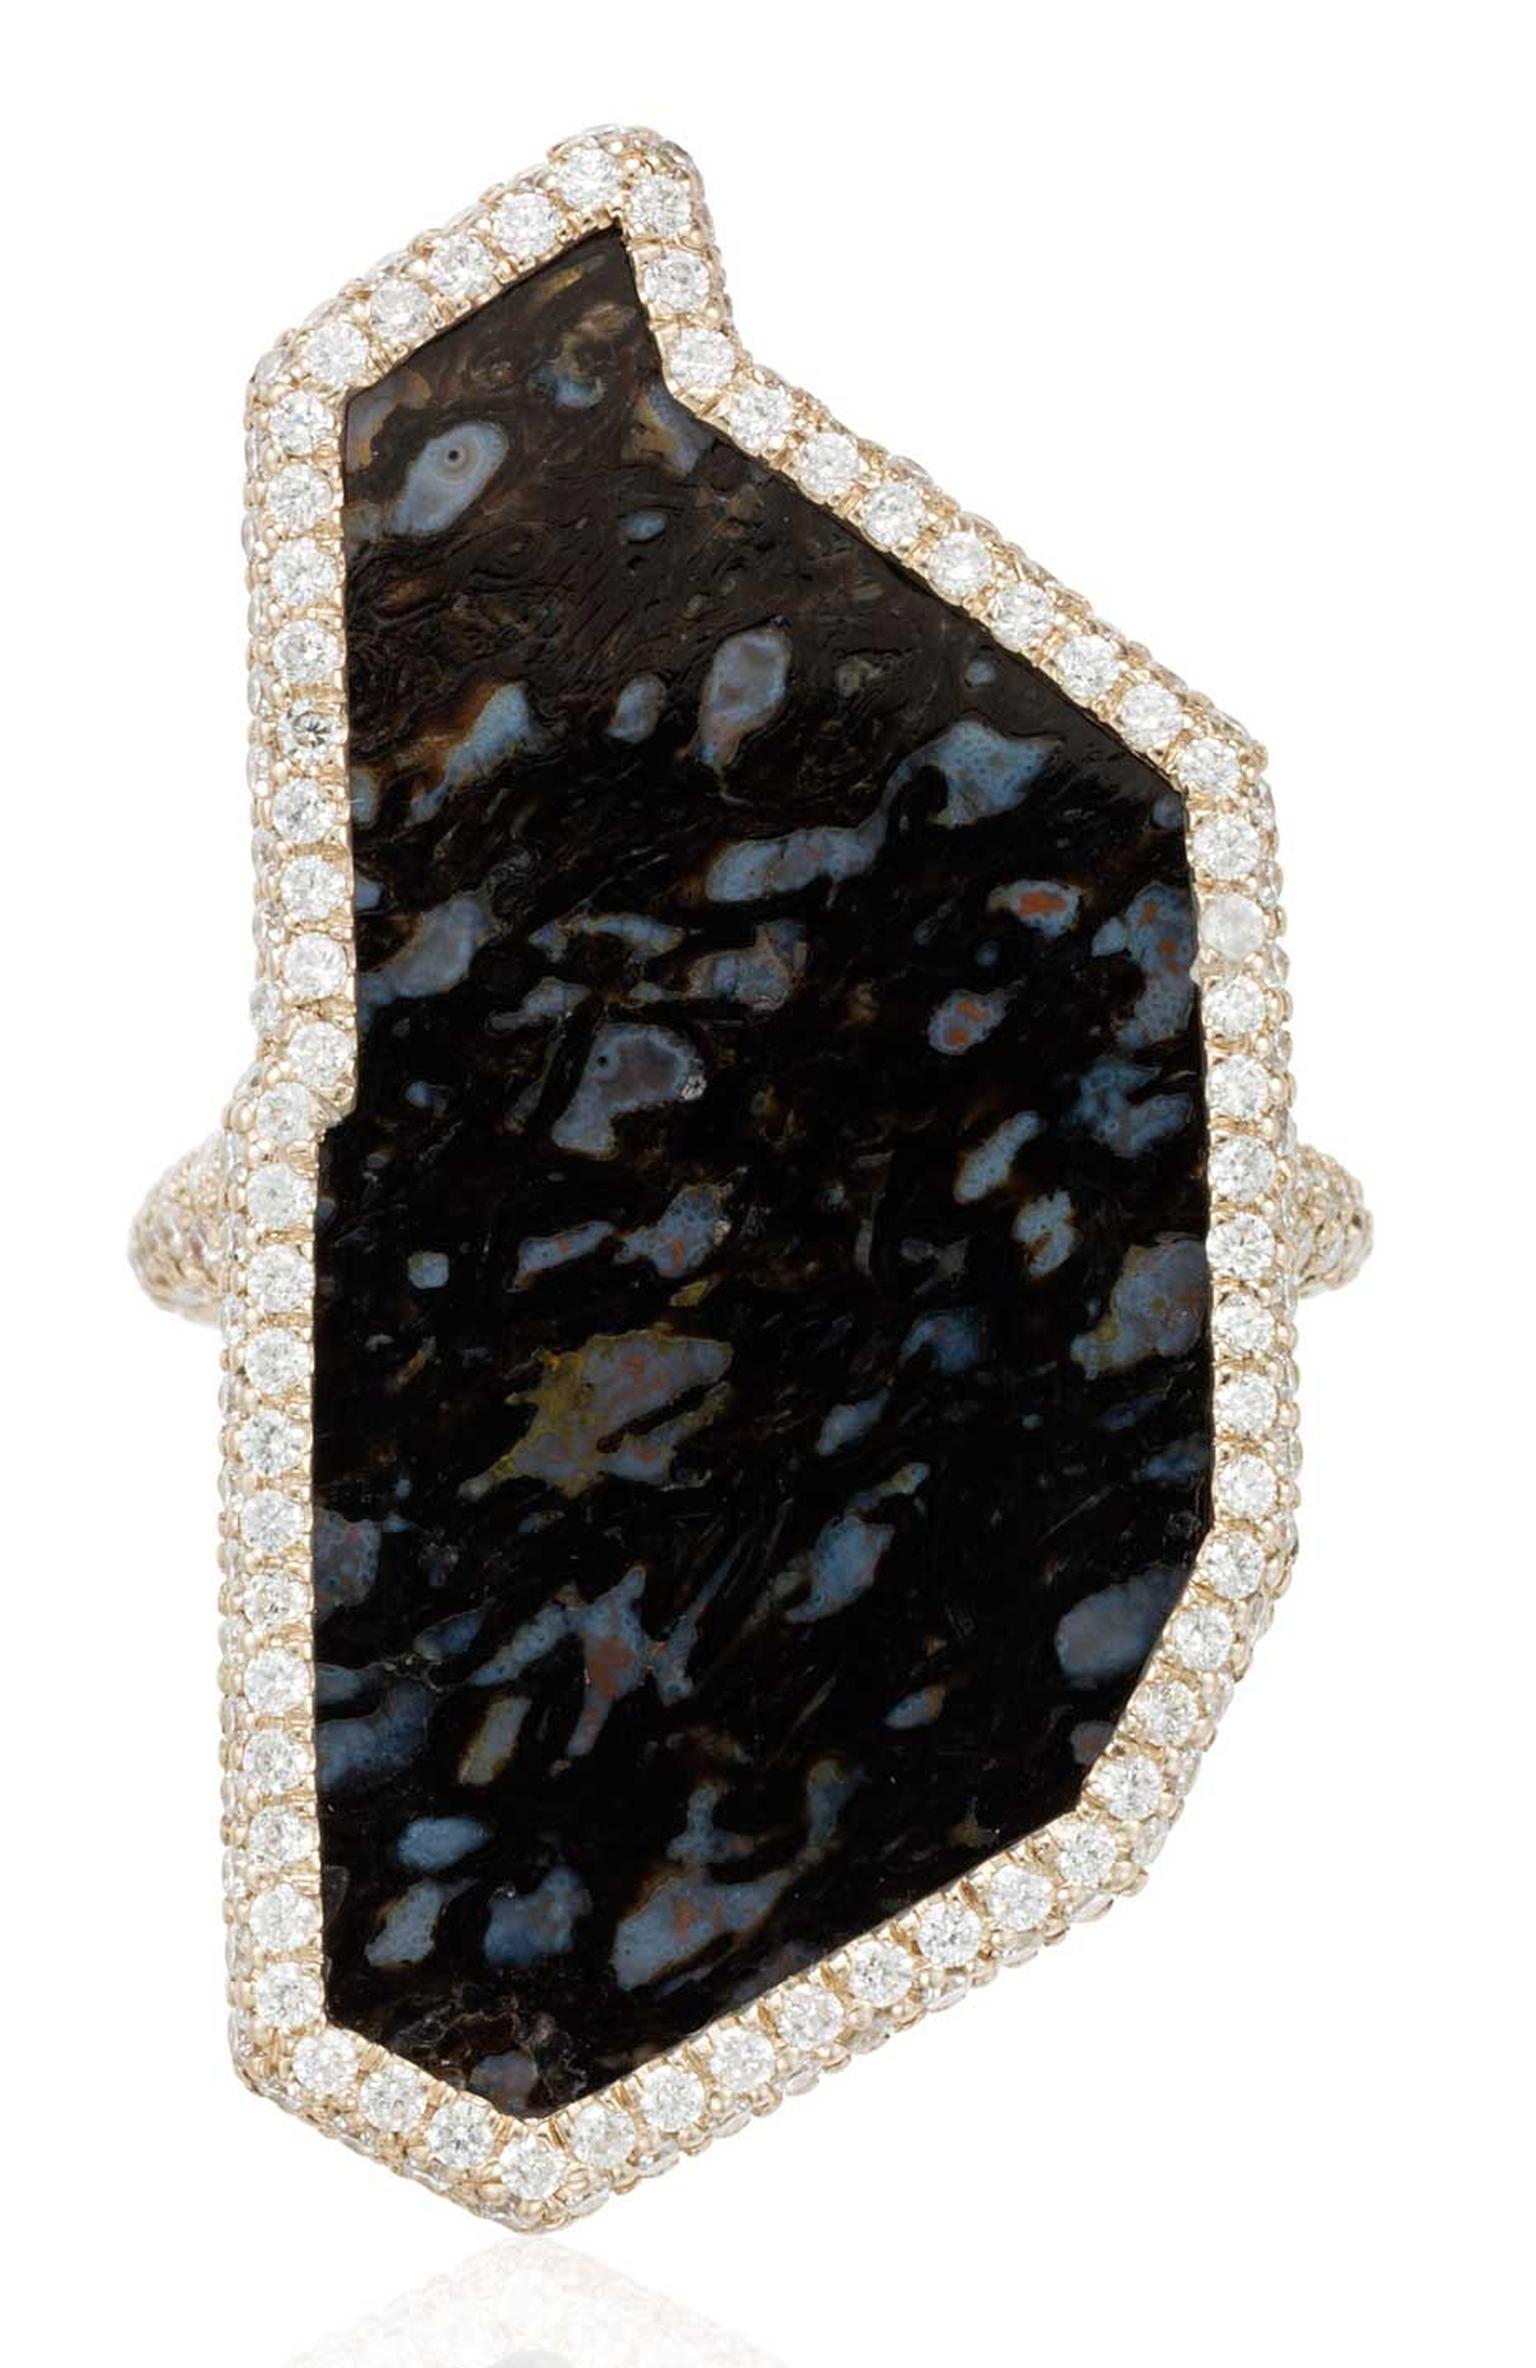 This dramatic dinosaur bone and diamond cocktail ring from Monique Péan mixes the rich hues of fossilised dinosaur bone with the sparkle and uniformity of micro-pavé diamonds.